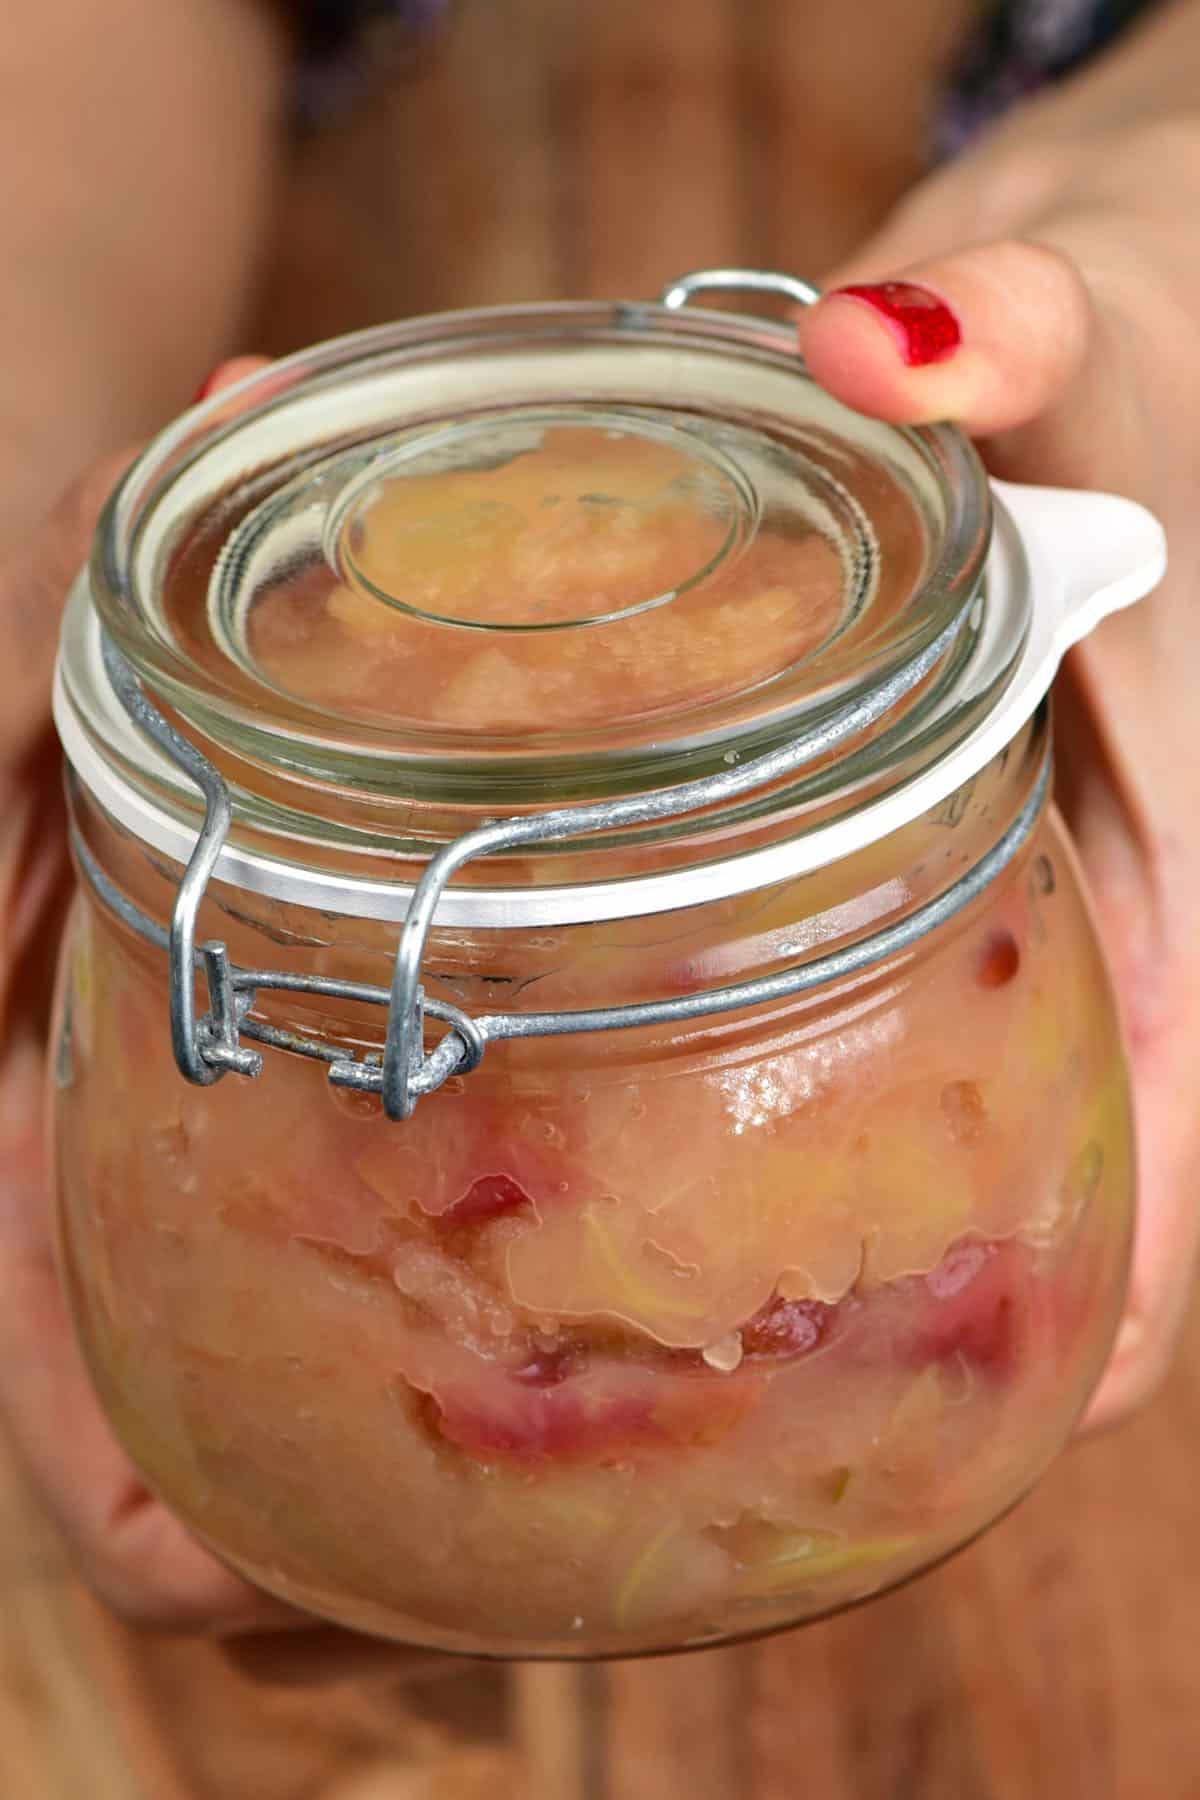 A closed jar with homemade Applesauce